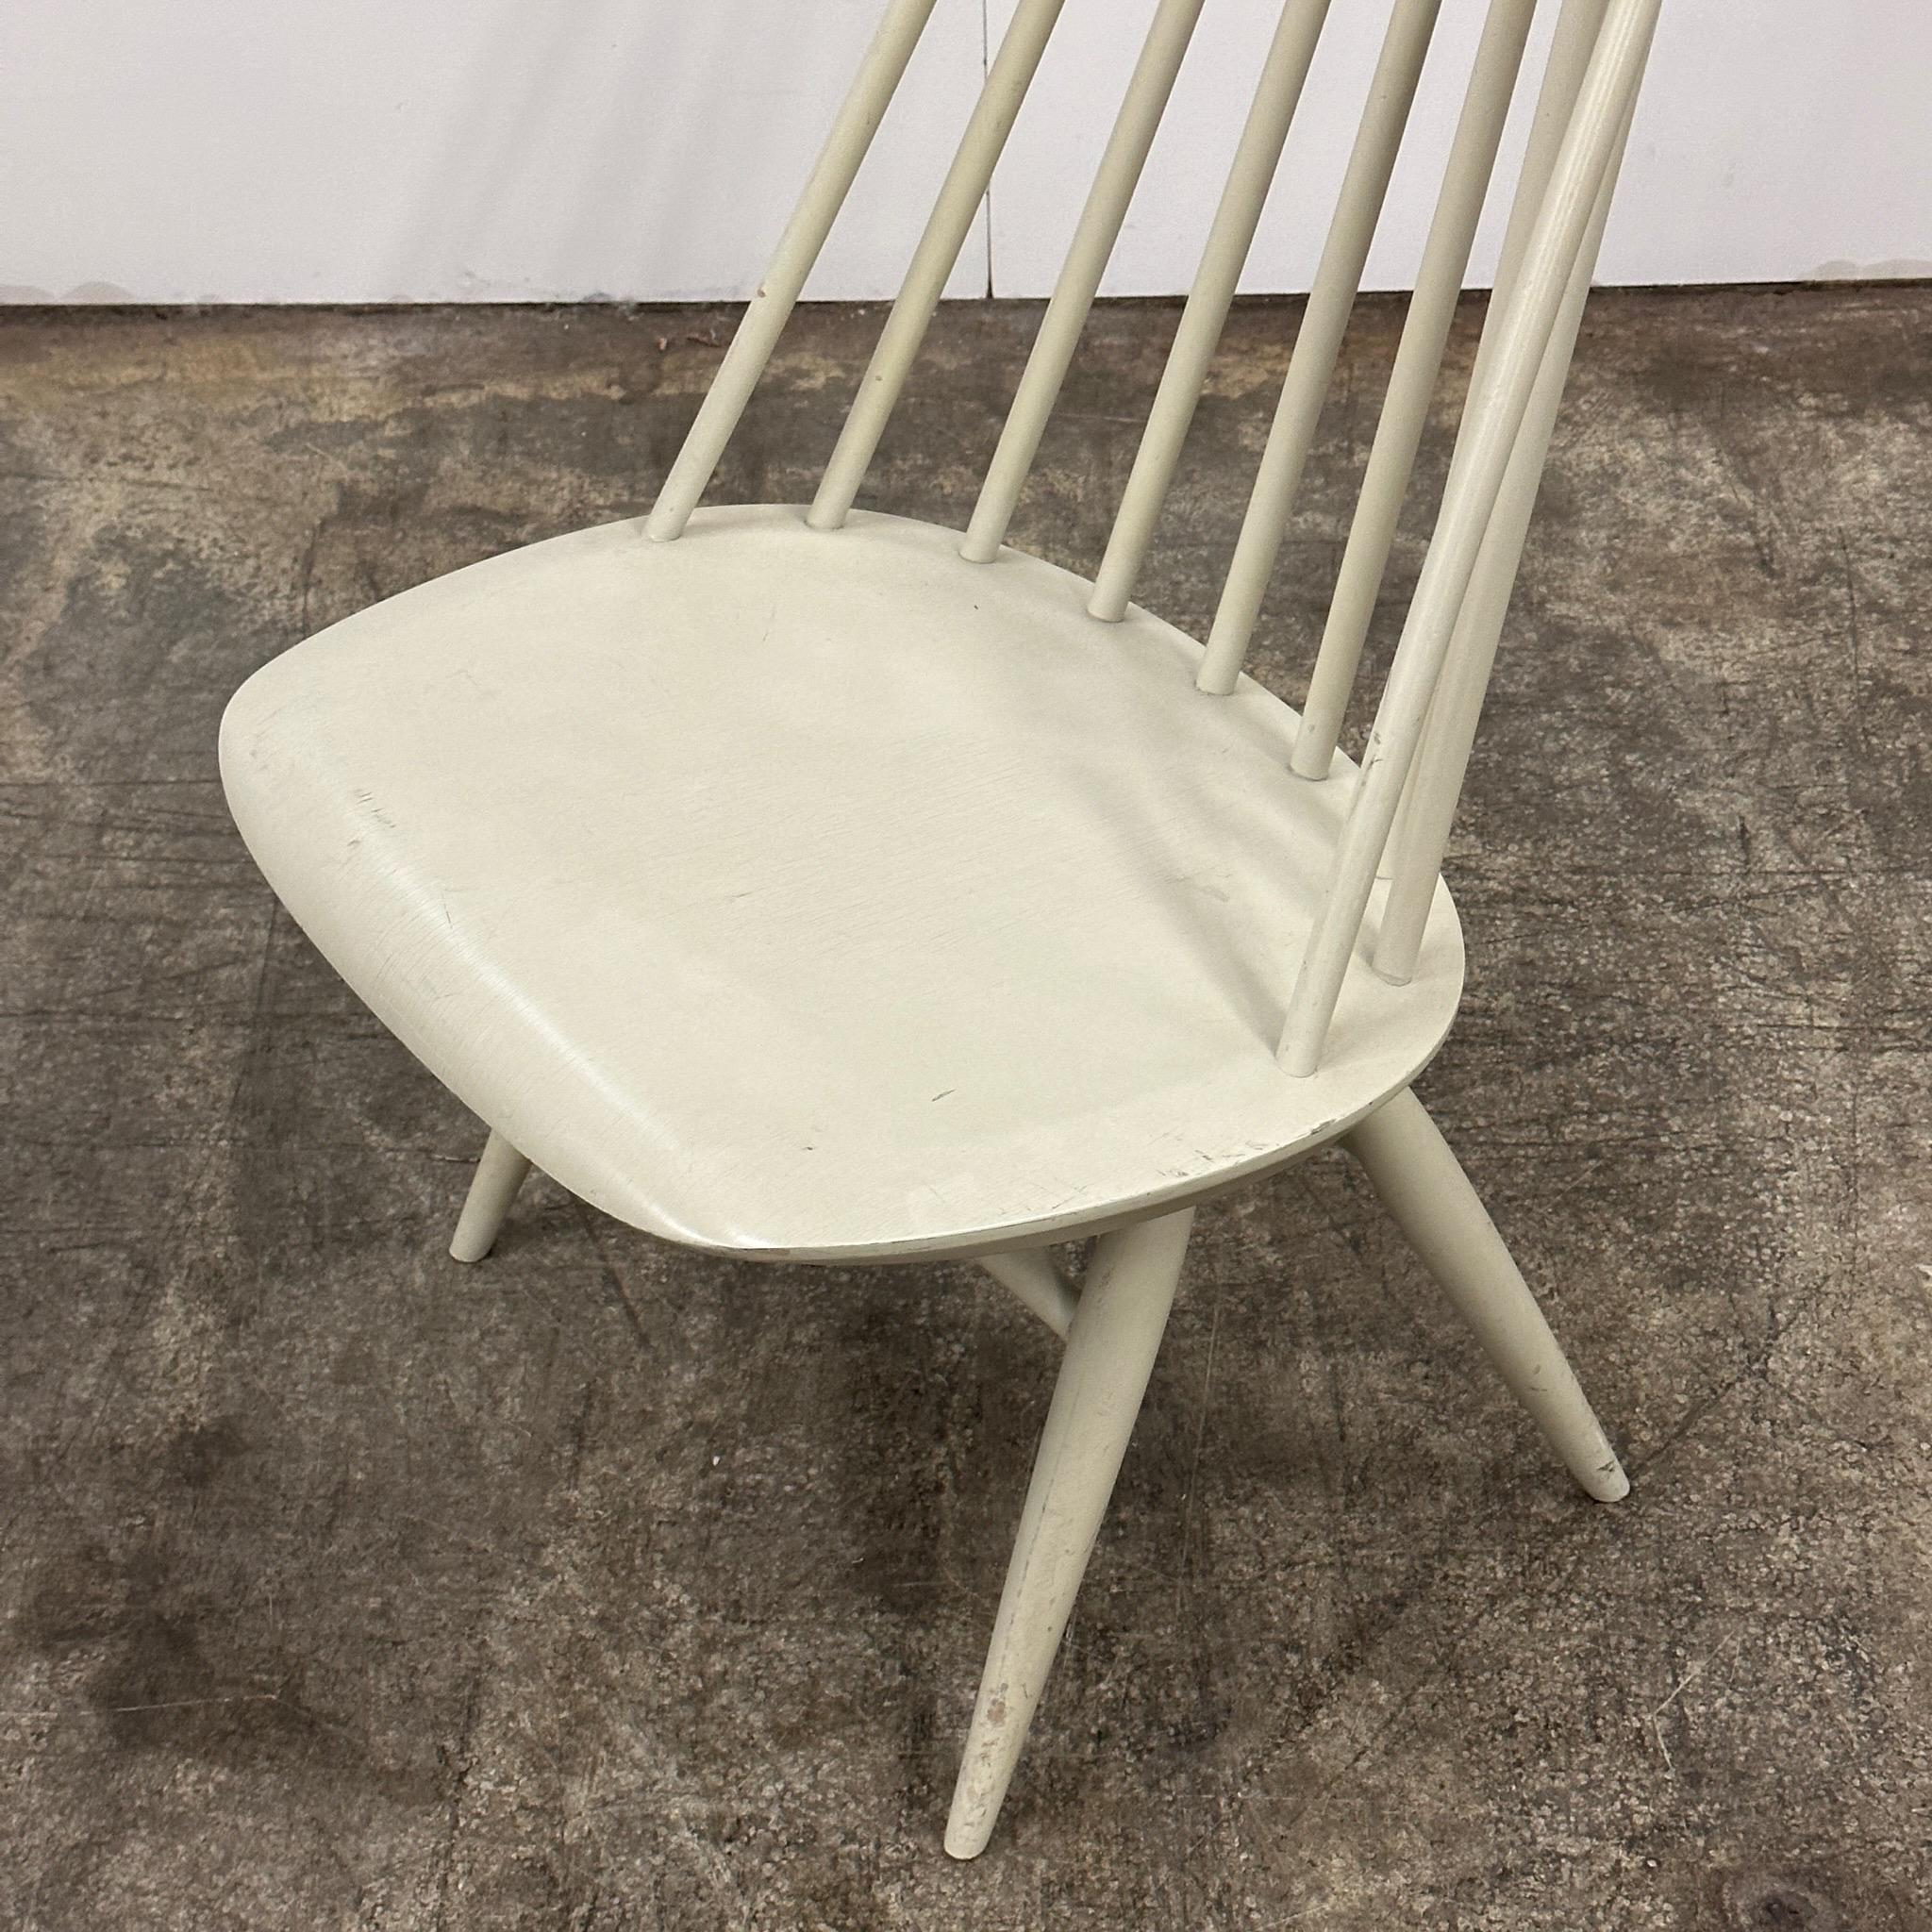 c. 1960s. Iconic mademoiselle chair painted white but aged. Tagged. Made in Sweden